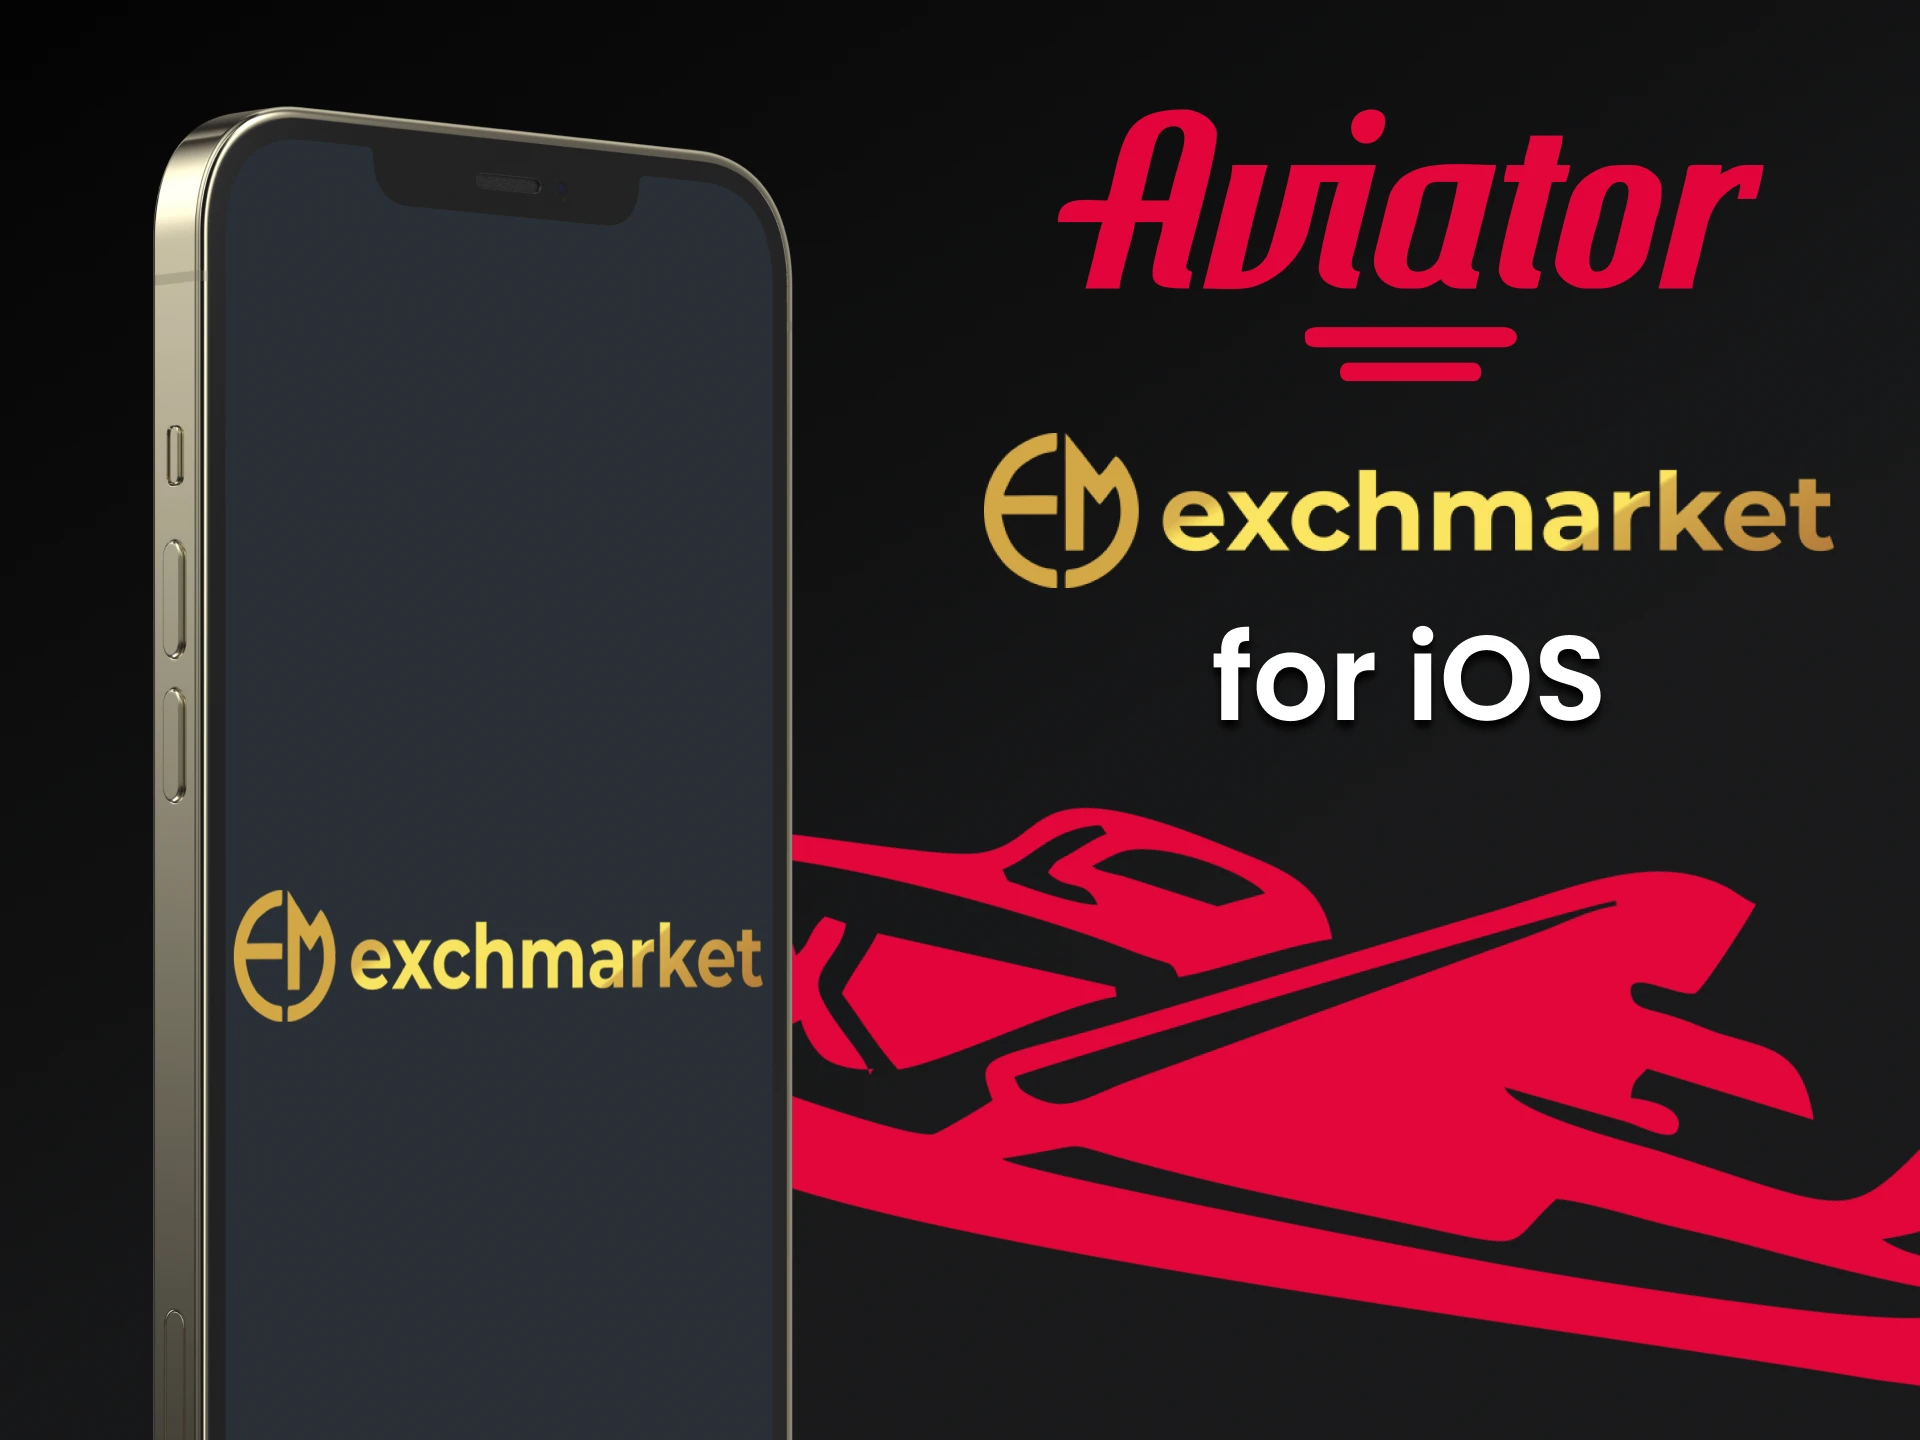 Install the Exchmarket app on iOS to play Aviator.